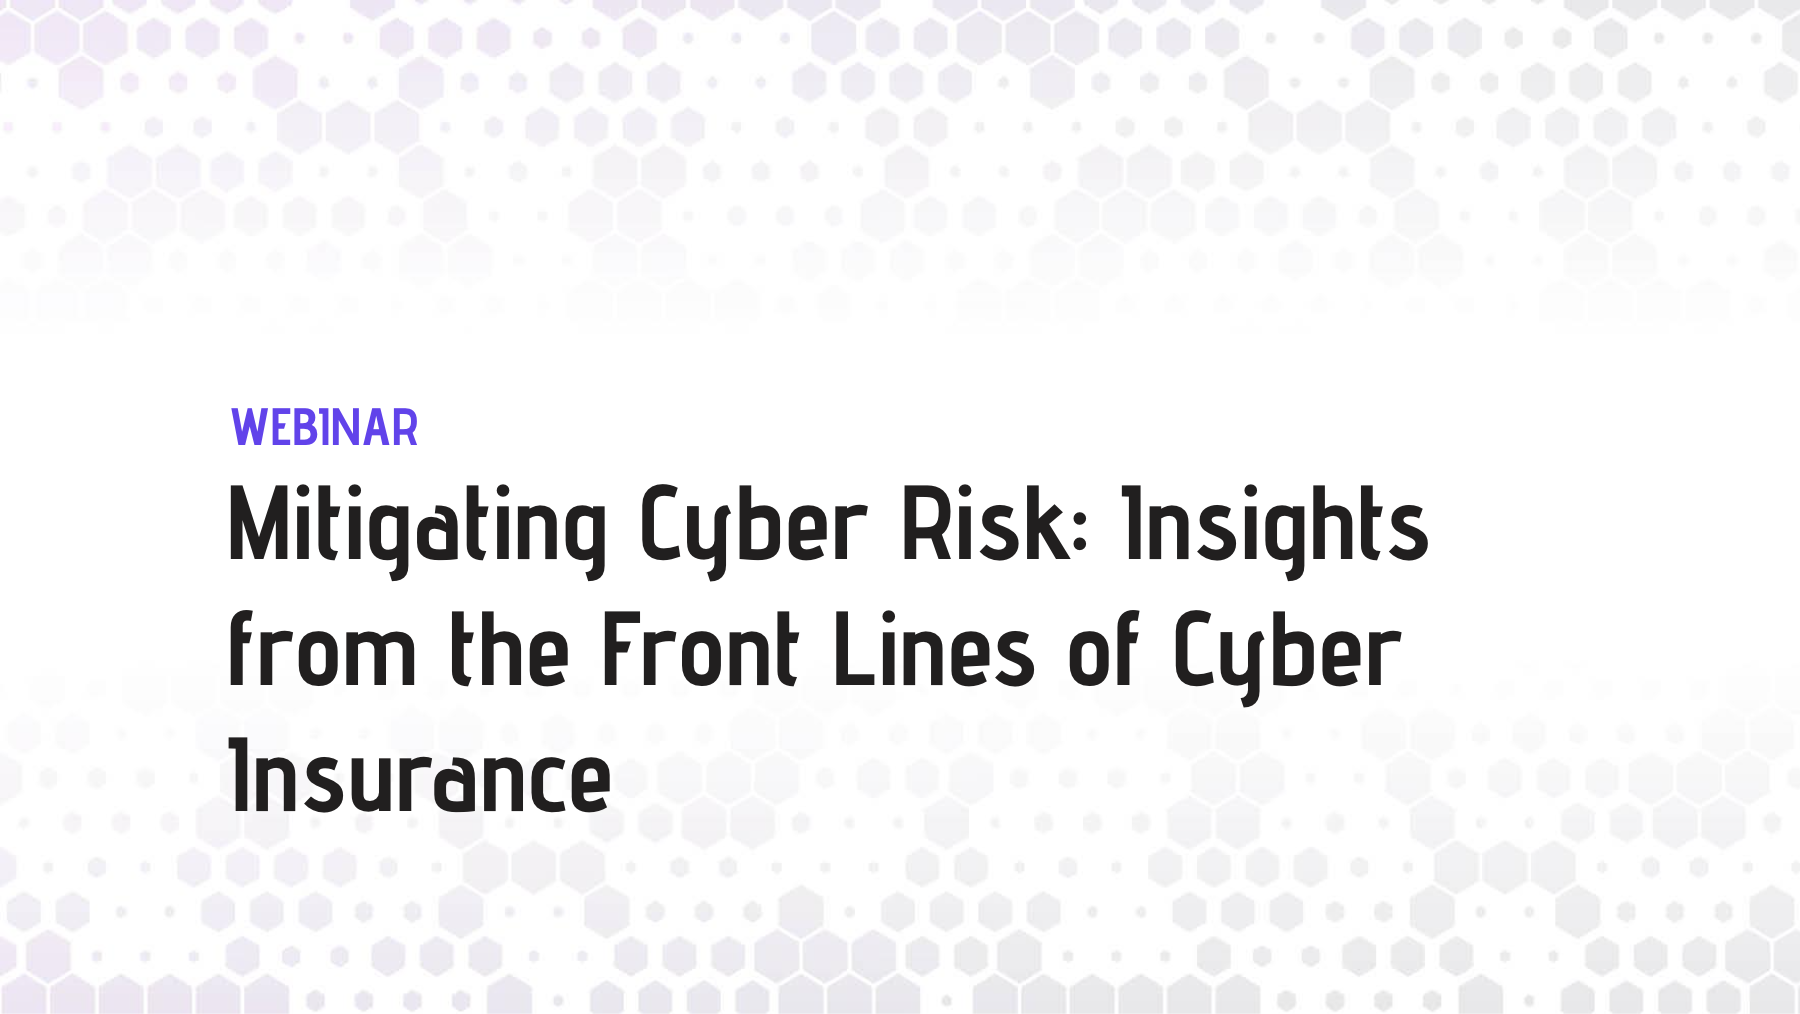 Mitigating Cyber Risk: Insights from the Front Lines of Cyber Insurance